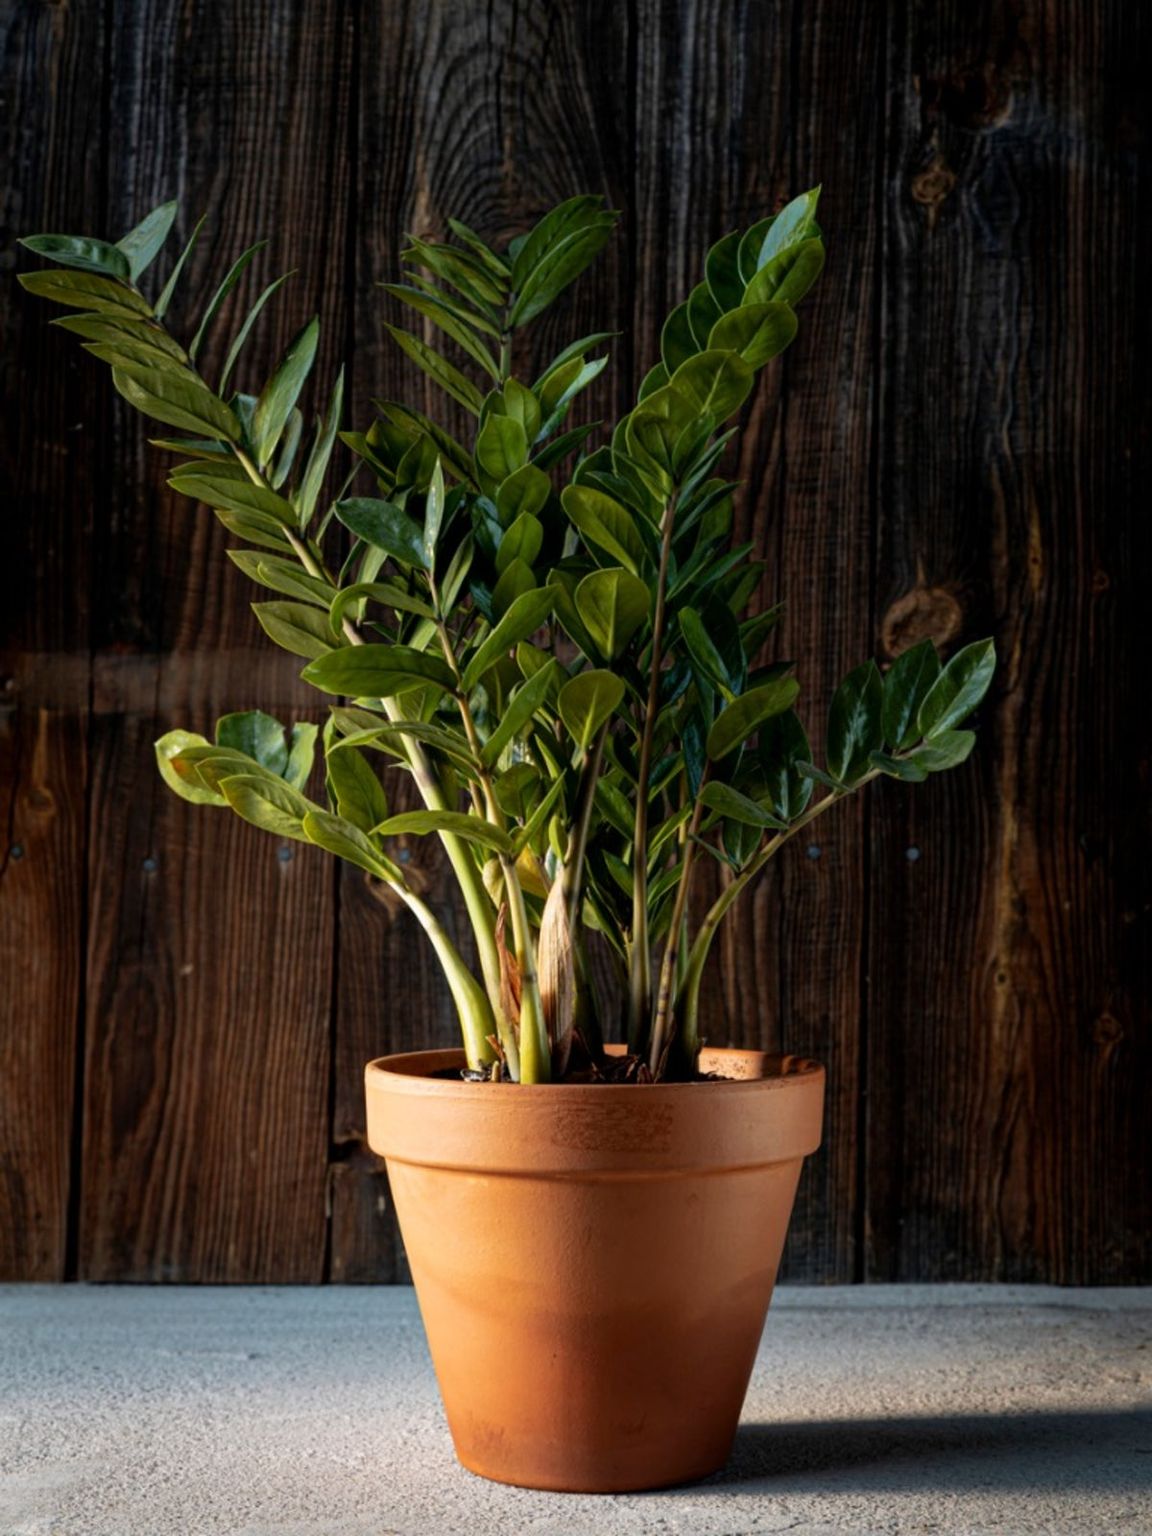 Shade Plants For Inside - Indoor Tropical Plants For Shade